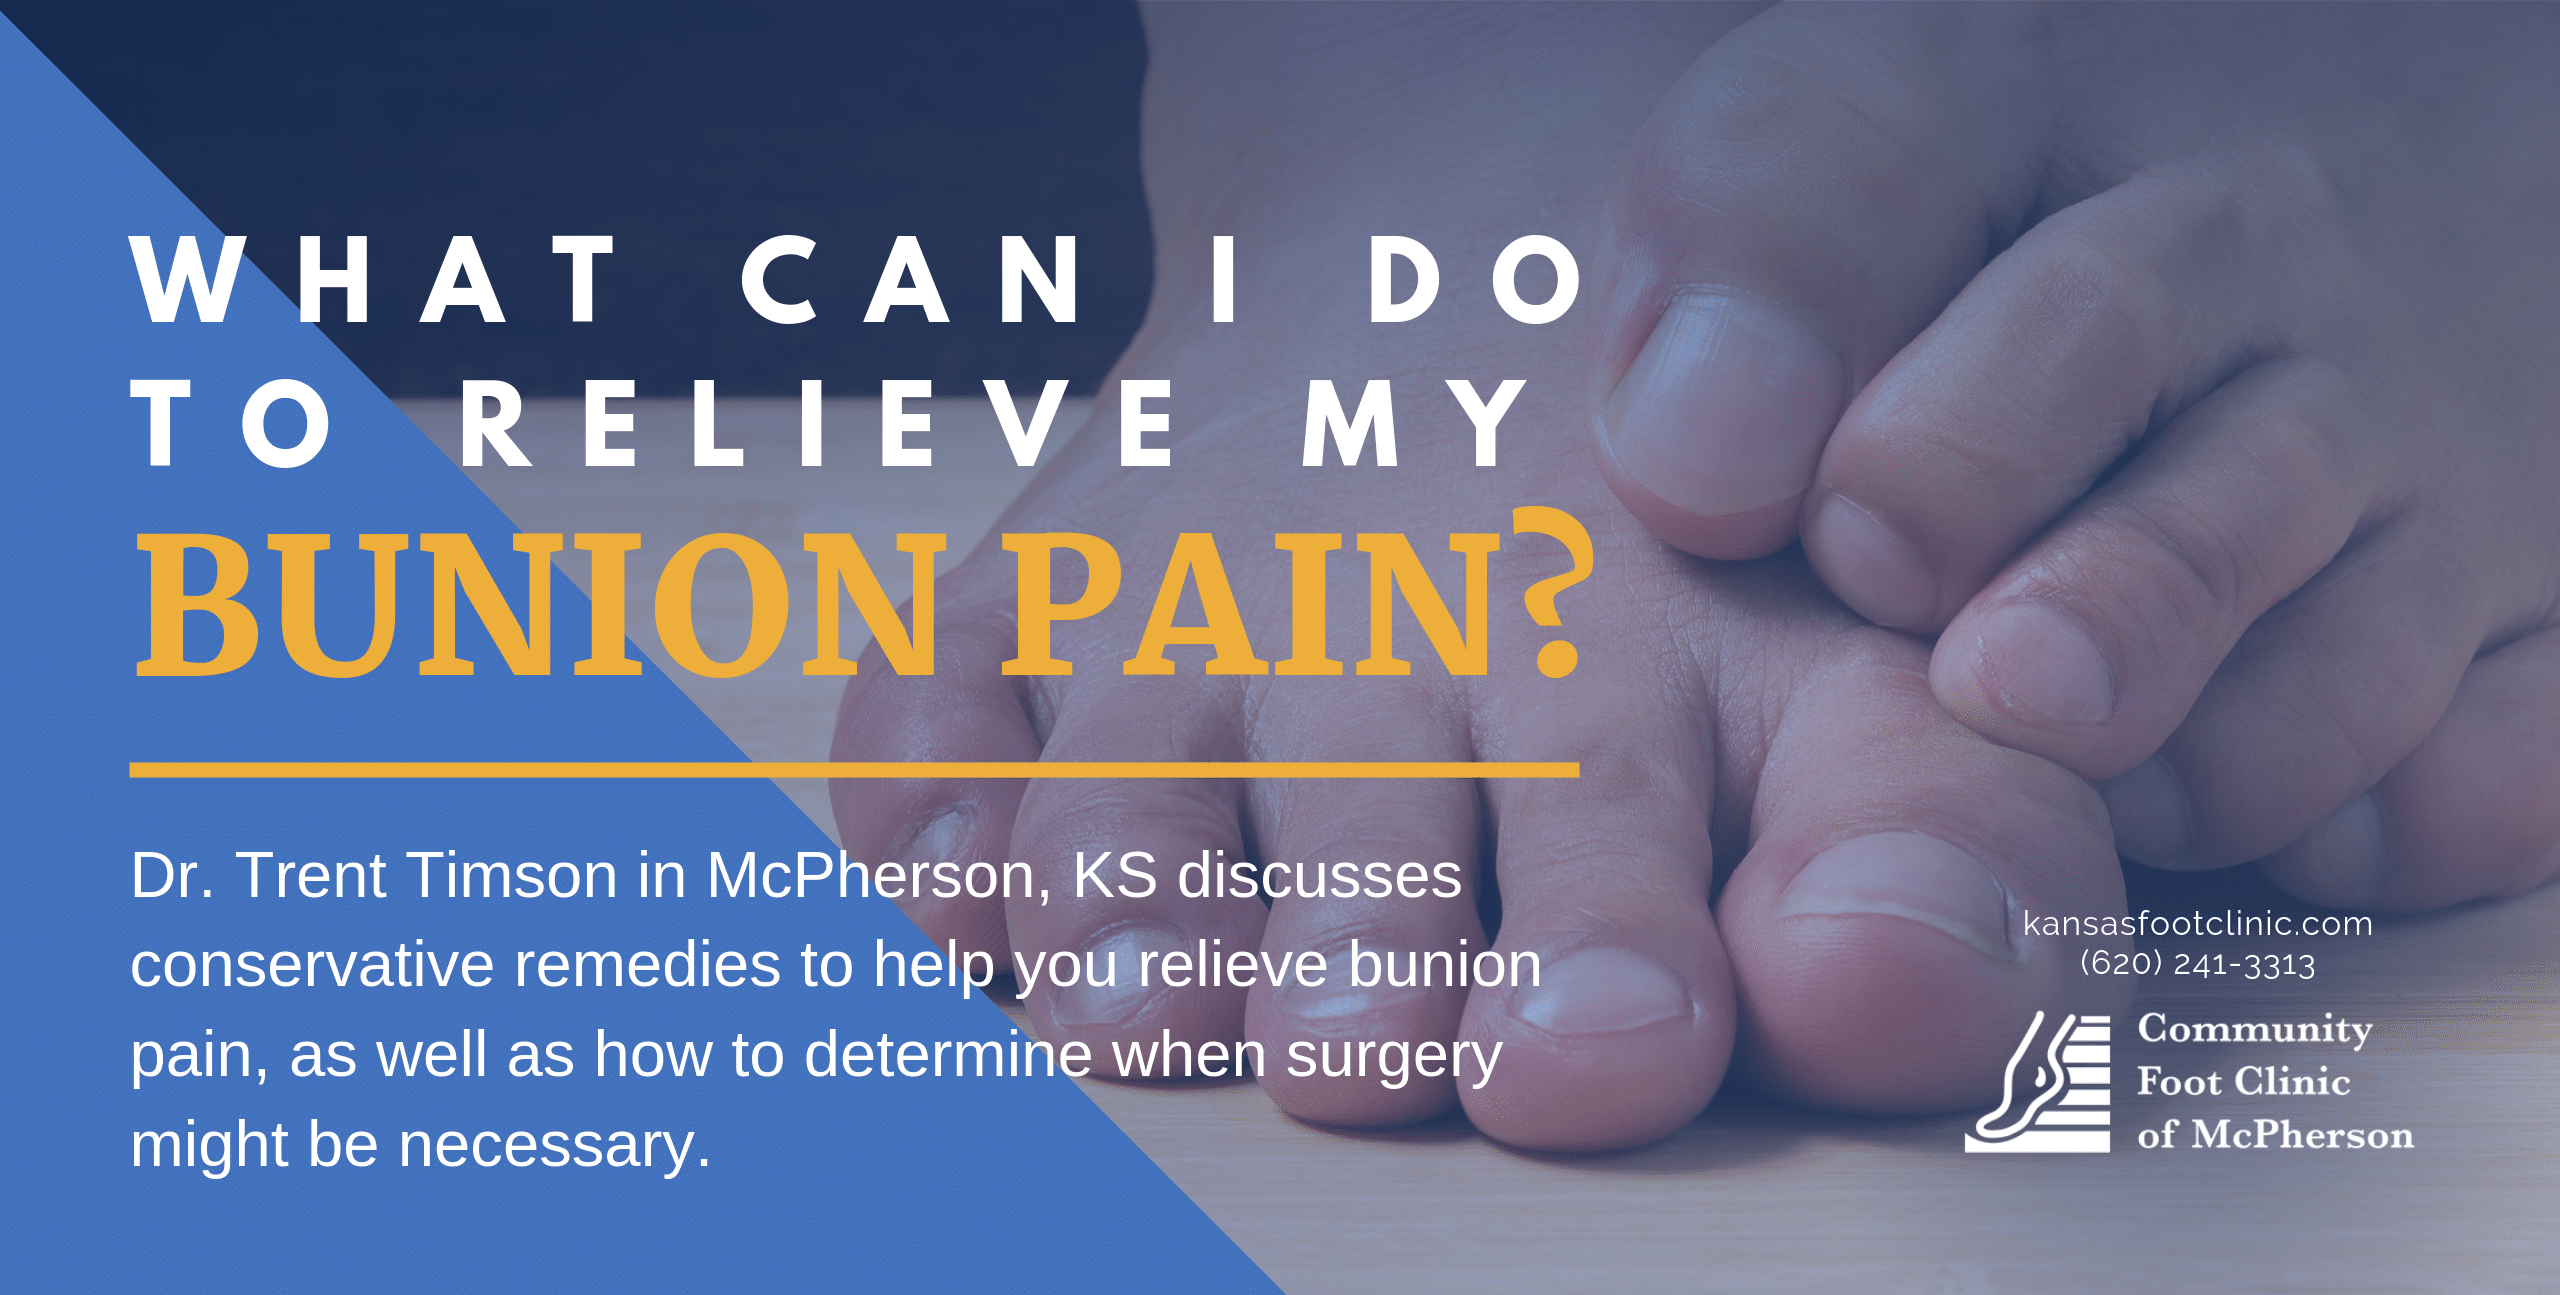 What can I do to relieve my bunion pain?